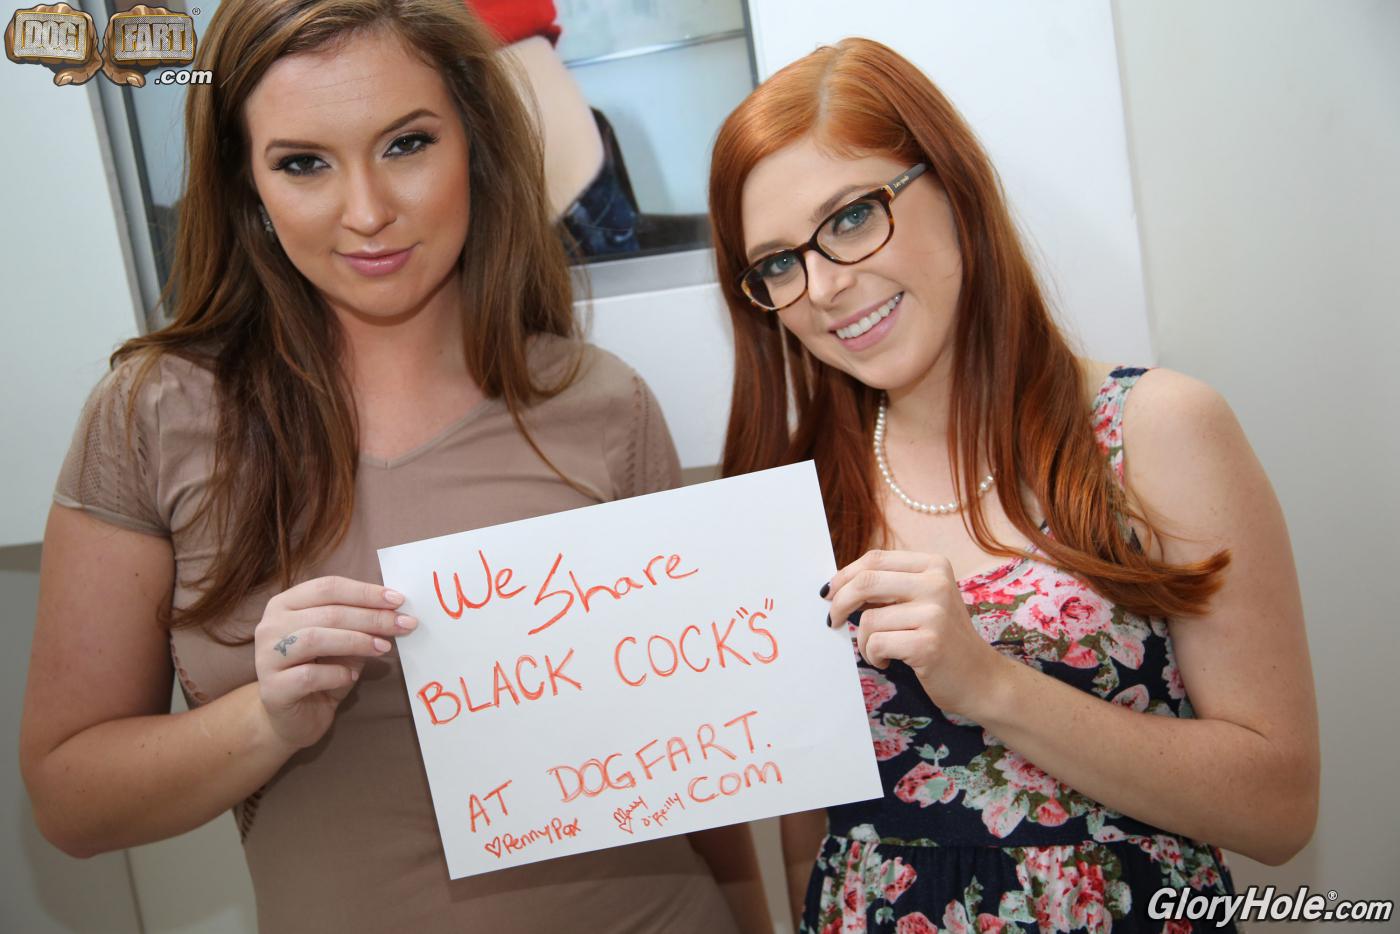 Penny Pax And Maddy Oreilly Pretty Much Wrote The Book On Being 1